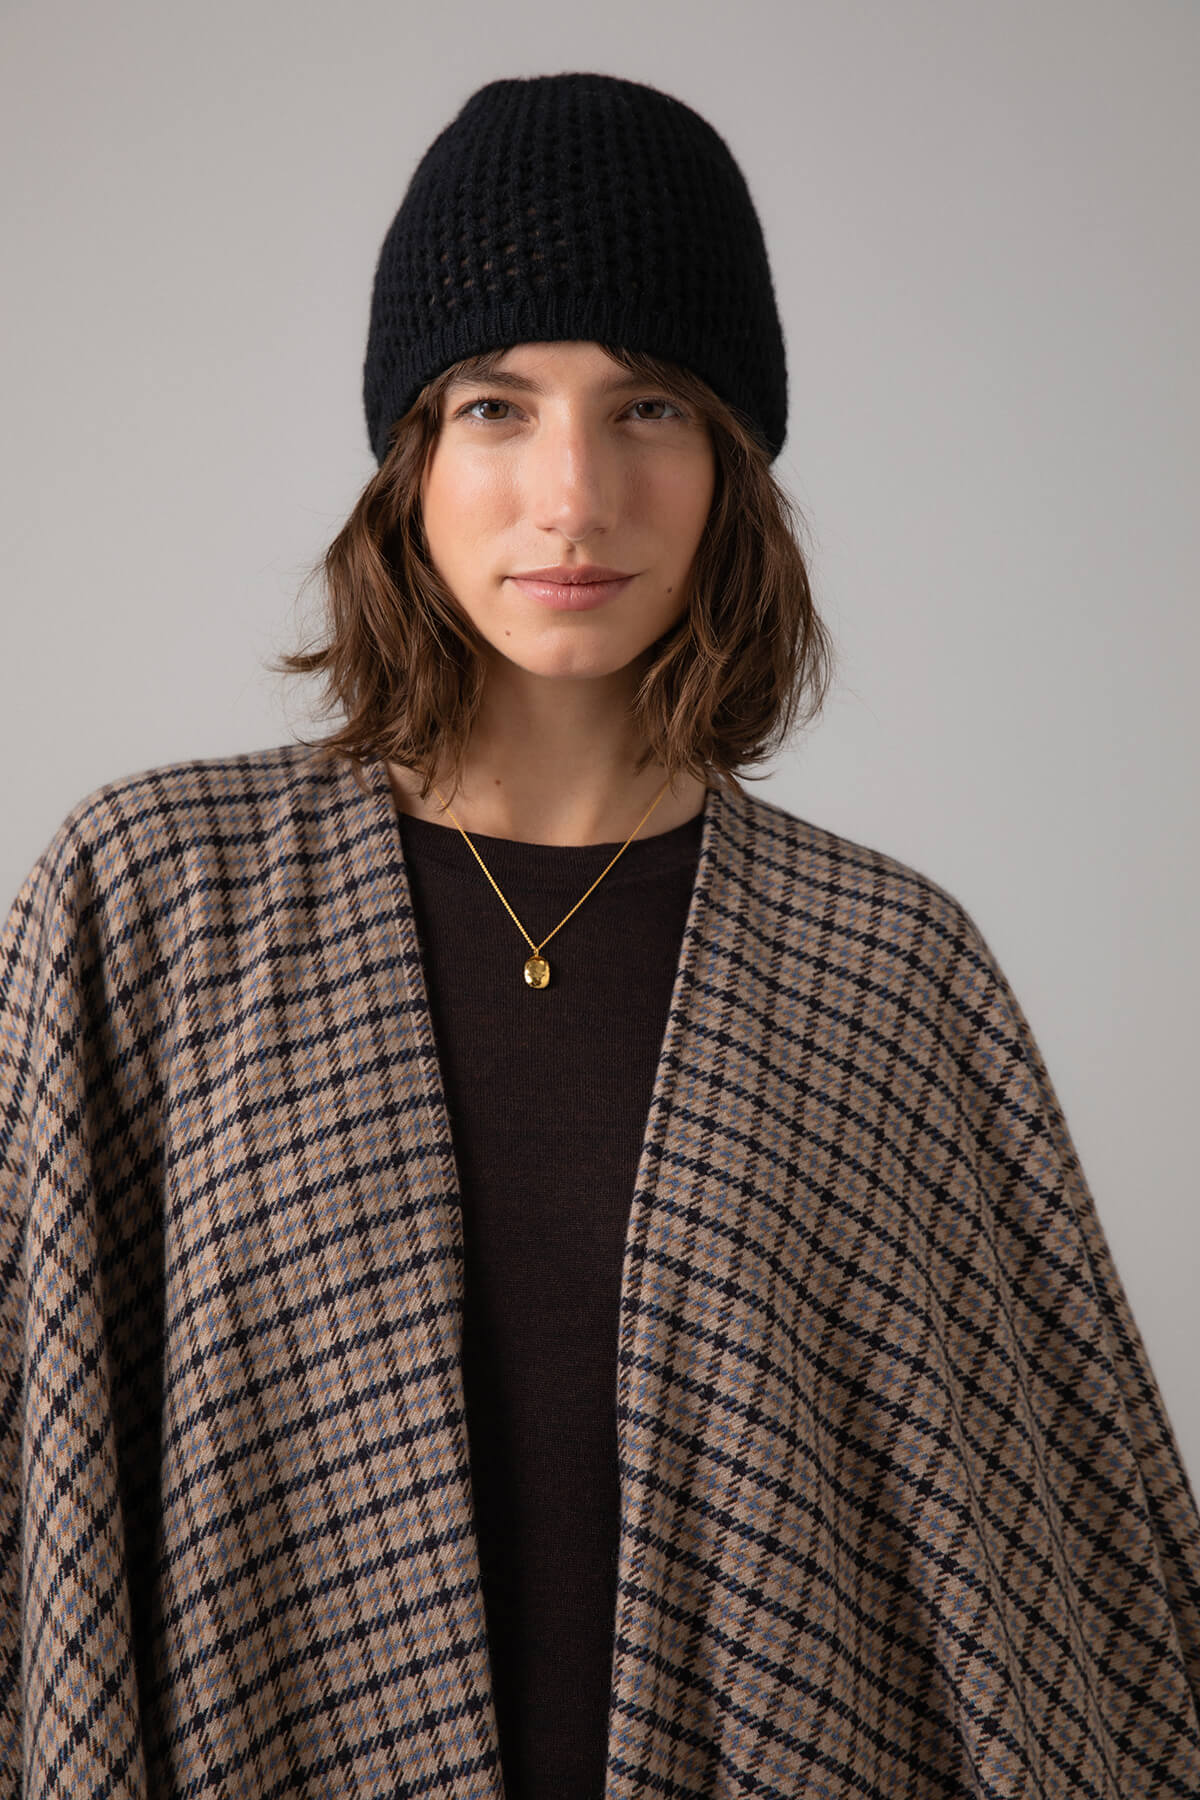 Johnstons of Elgin Cashmere Poncho Cape in Brown gunclub worn with a Black Crochet Cashmere Hat on a grey background TA000501RU7299ONE